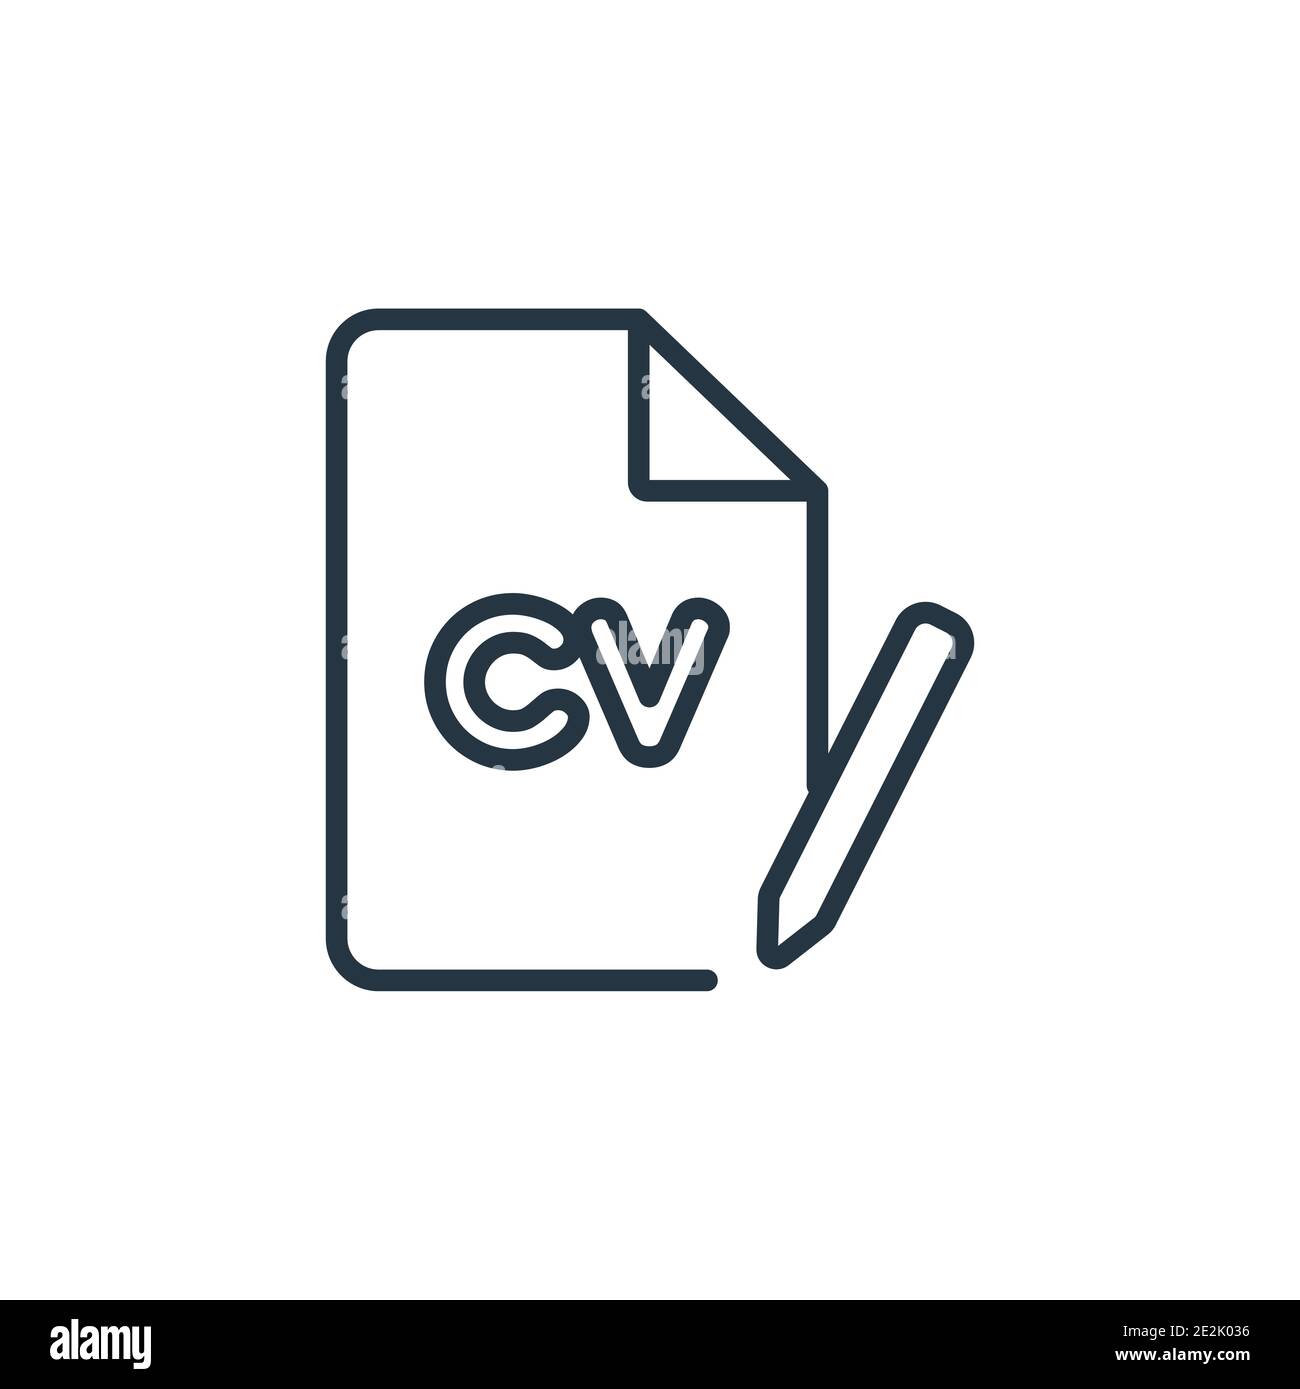 Cv outline vector icon. Thin line black icon, flat vector simple element illustration from editable resume concept isolated stroke on bac Vector Image & Art - Alamy